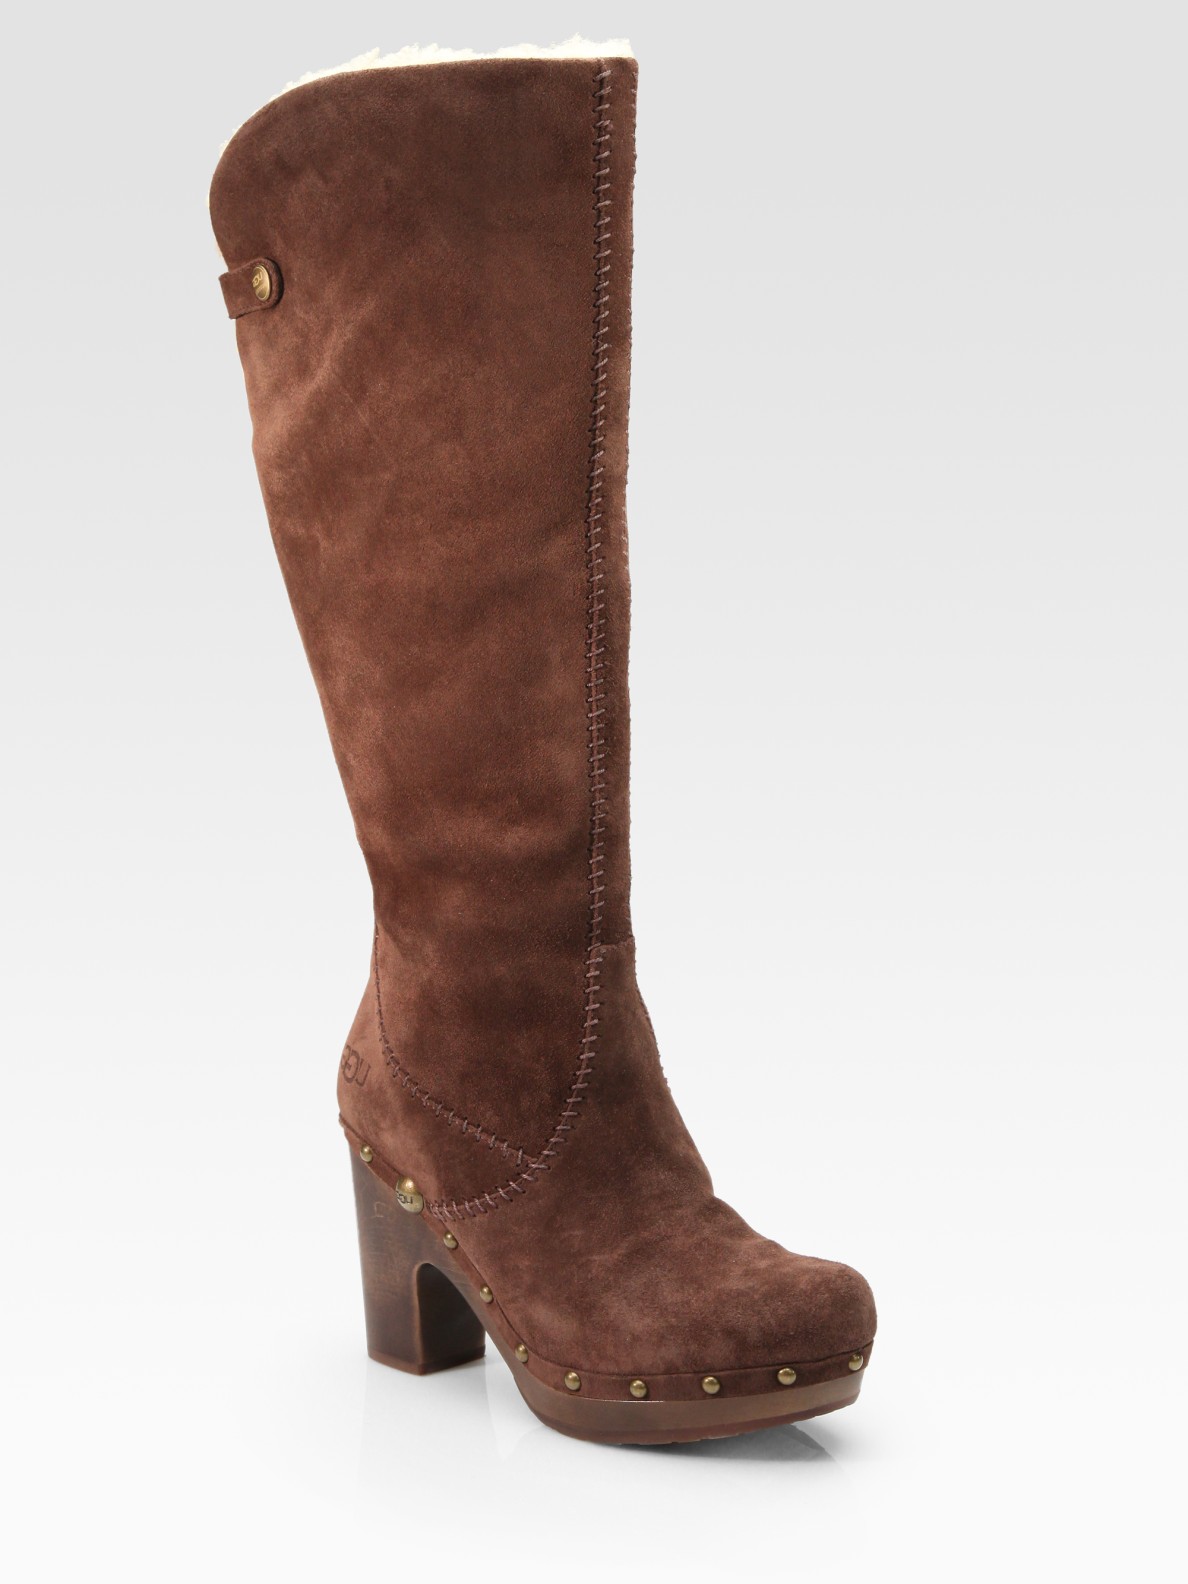 Ugg Lillian Suede Knee-high Clog Boots in Brown (chocolate) | Lyst